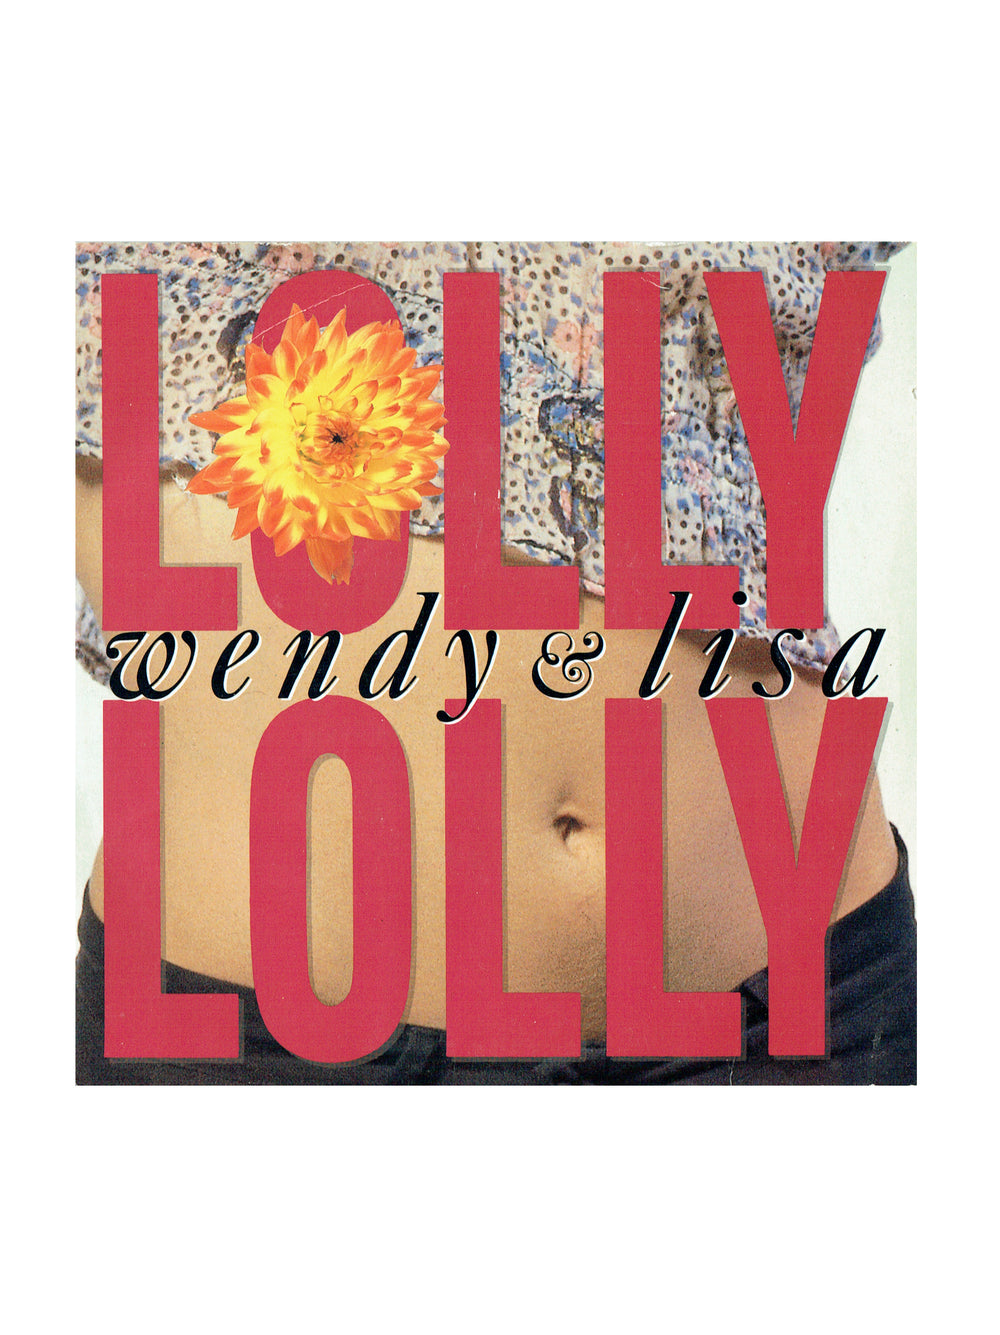 Wendy & Lisa Lolly Lolly 7 Inch Vinyl UK Original Release Prince TR